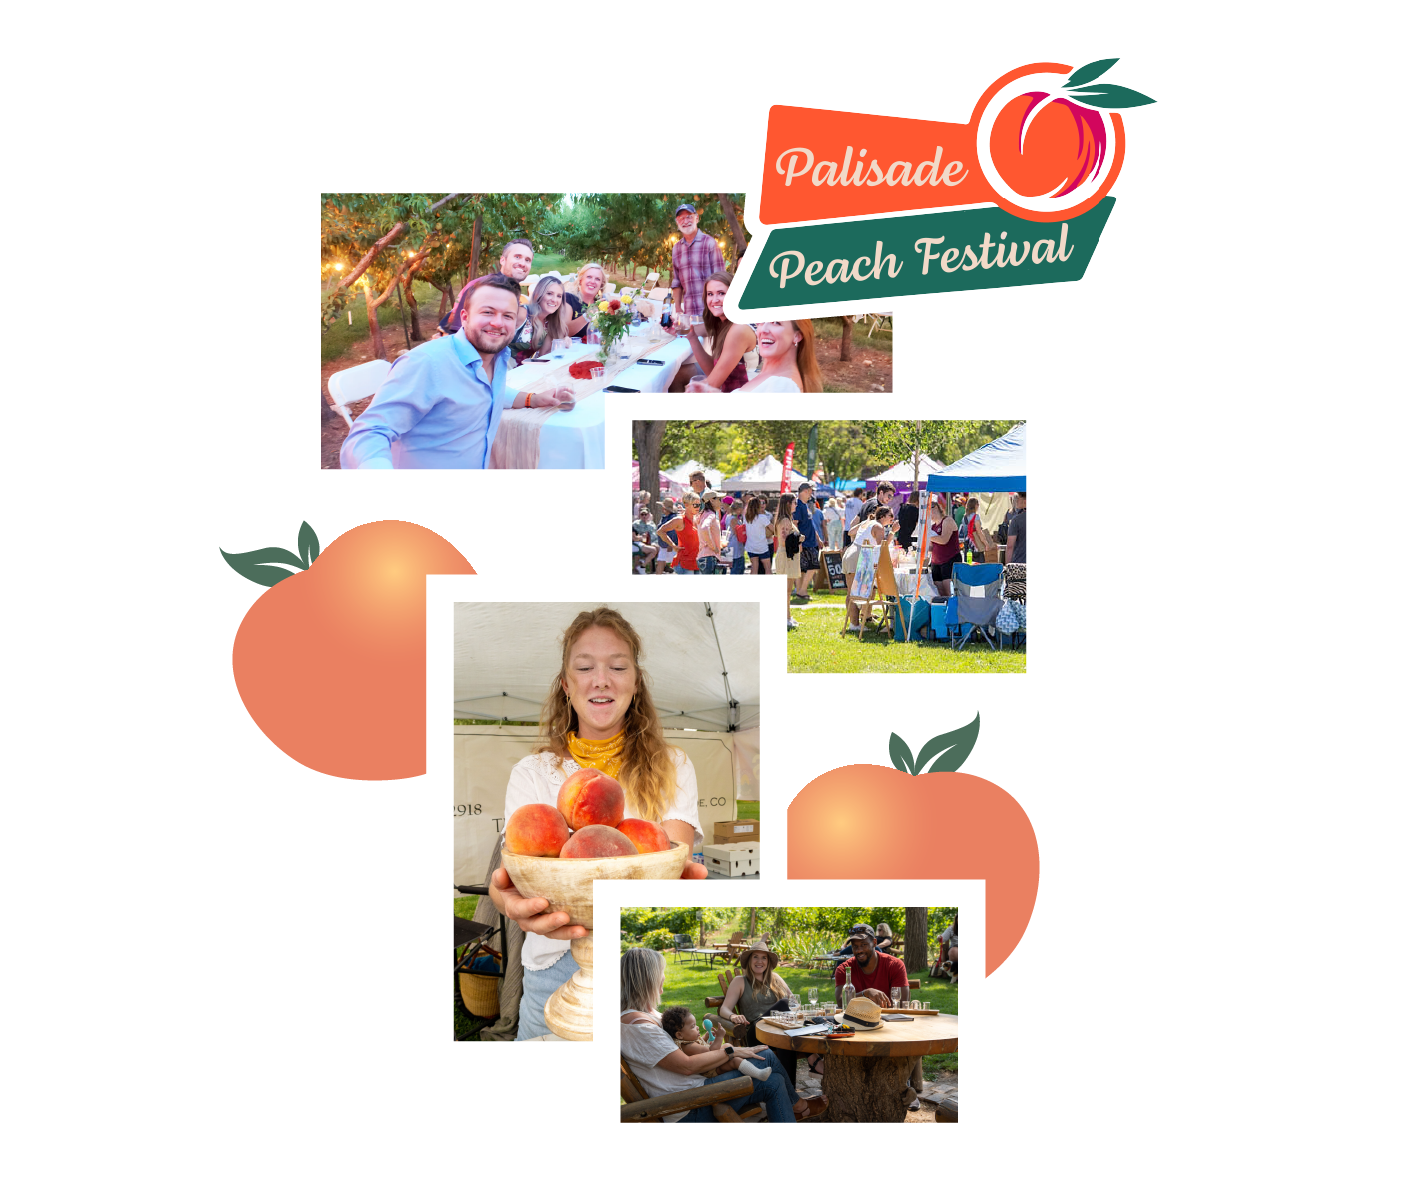 Collage of Palisade Peach Festival: people dining, crowd at event, woman with peaches, and outdoor gathering.